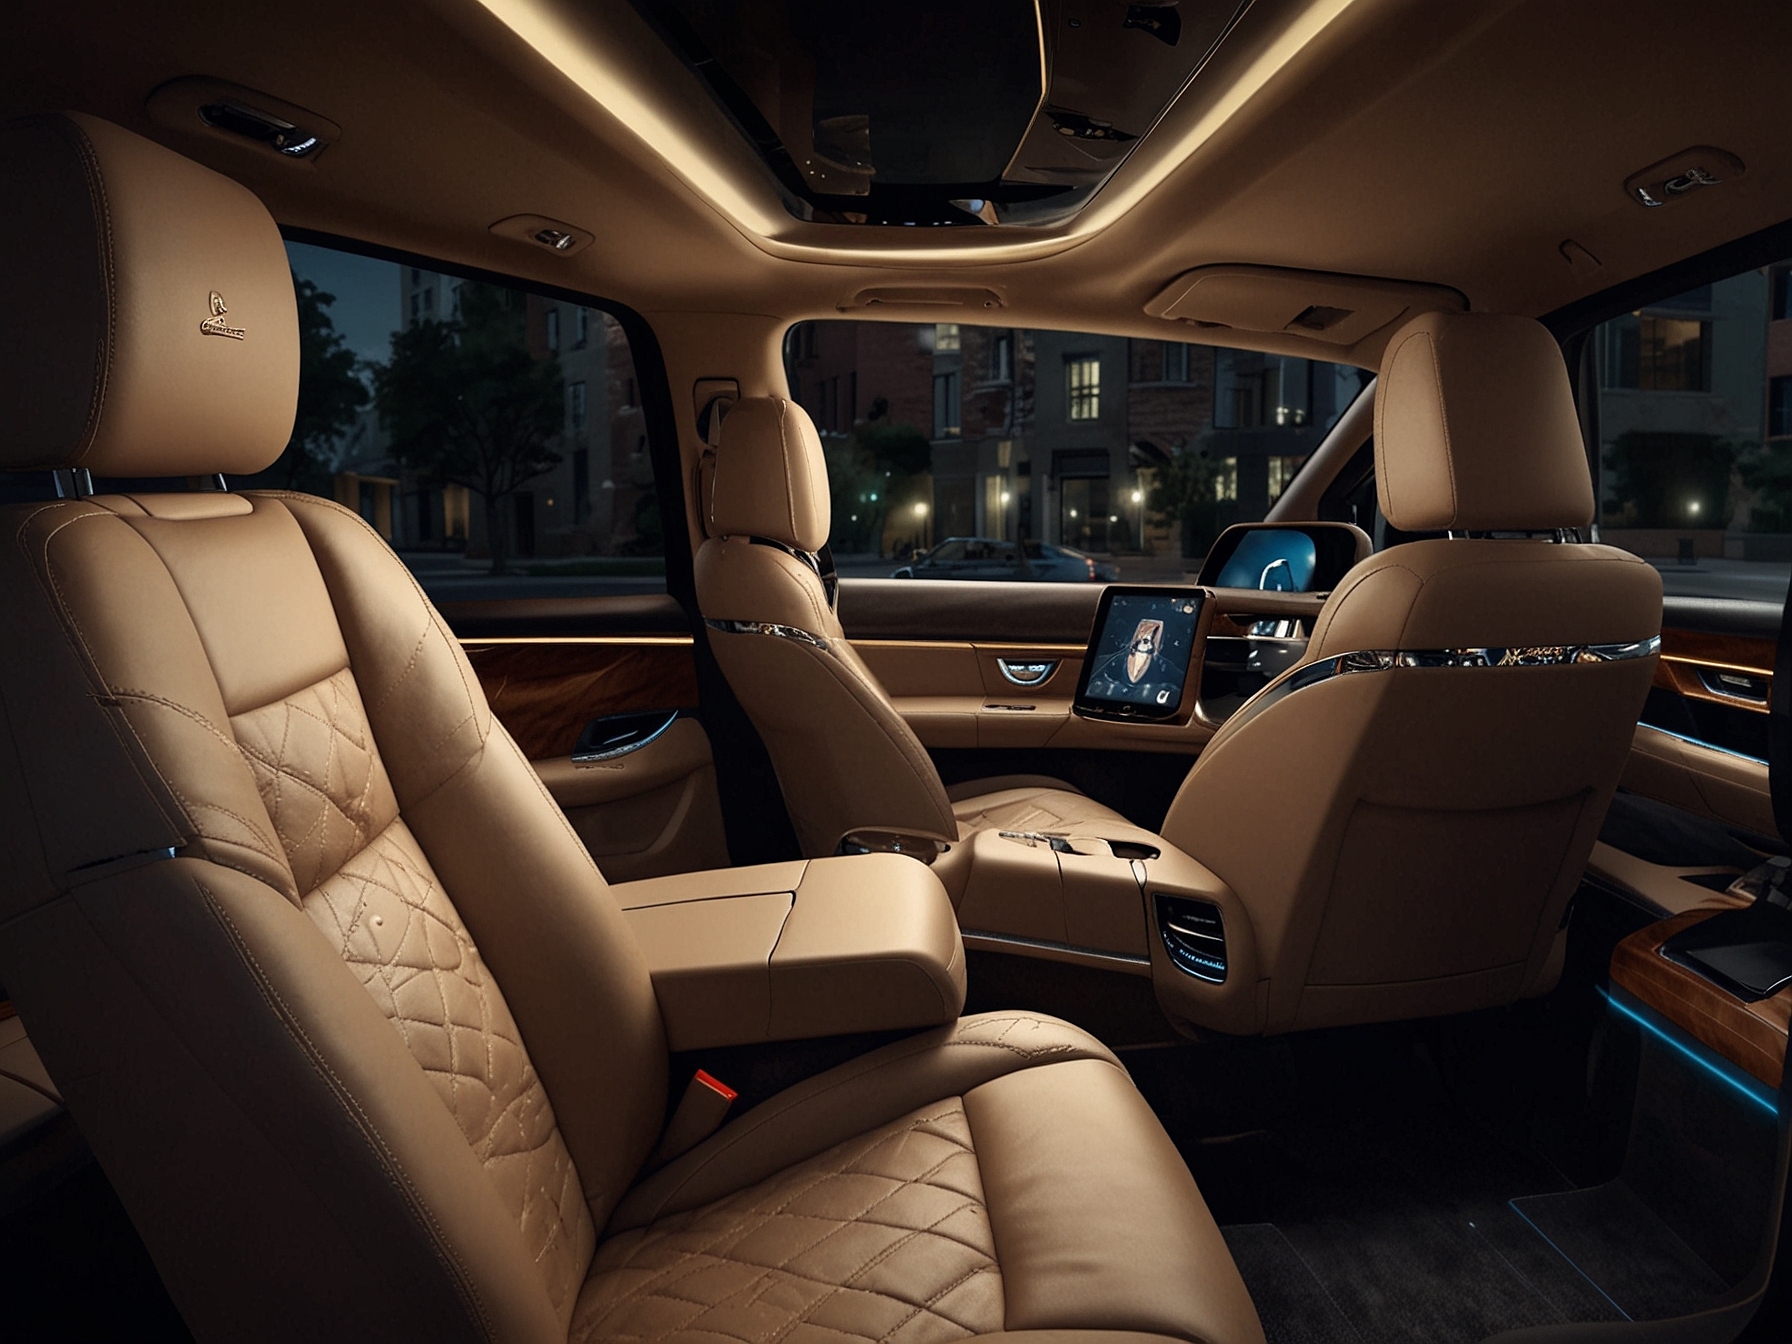 The luxurious interior of a 2024 Cadillac Escalade, showcasing leather seating and the augmented reality-enabled navigation system, which projects visual route guidance directly onto the windshield.